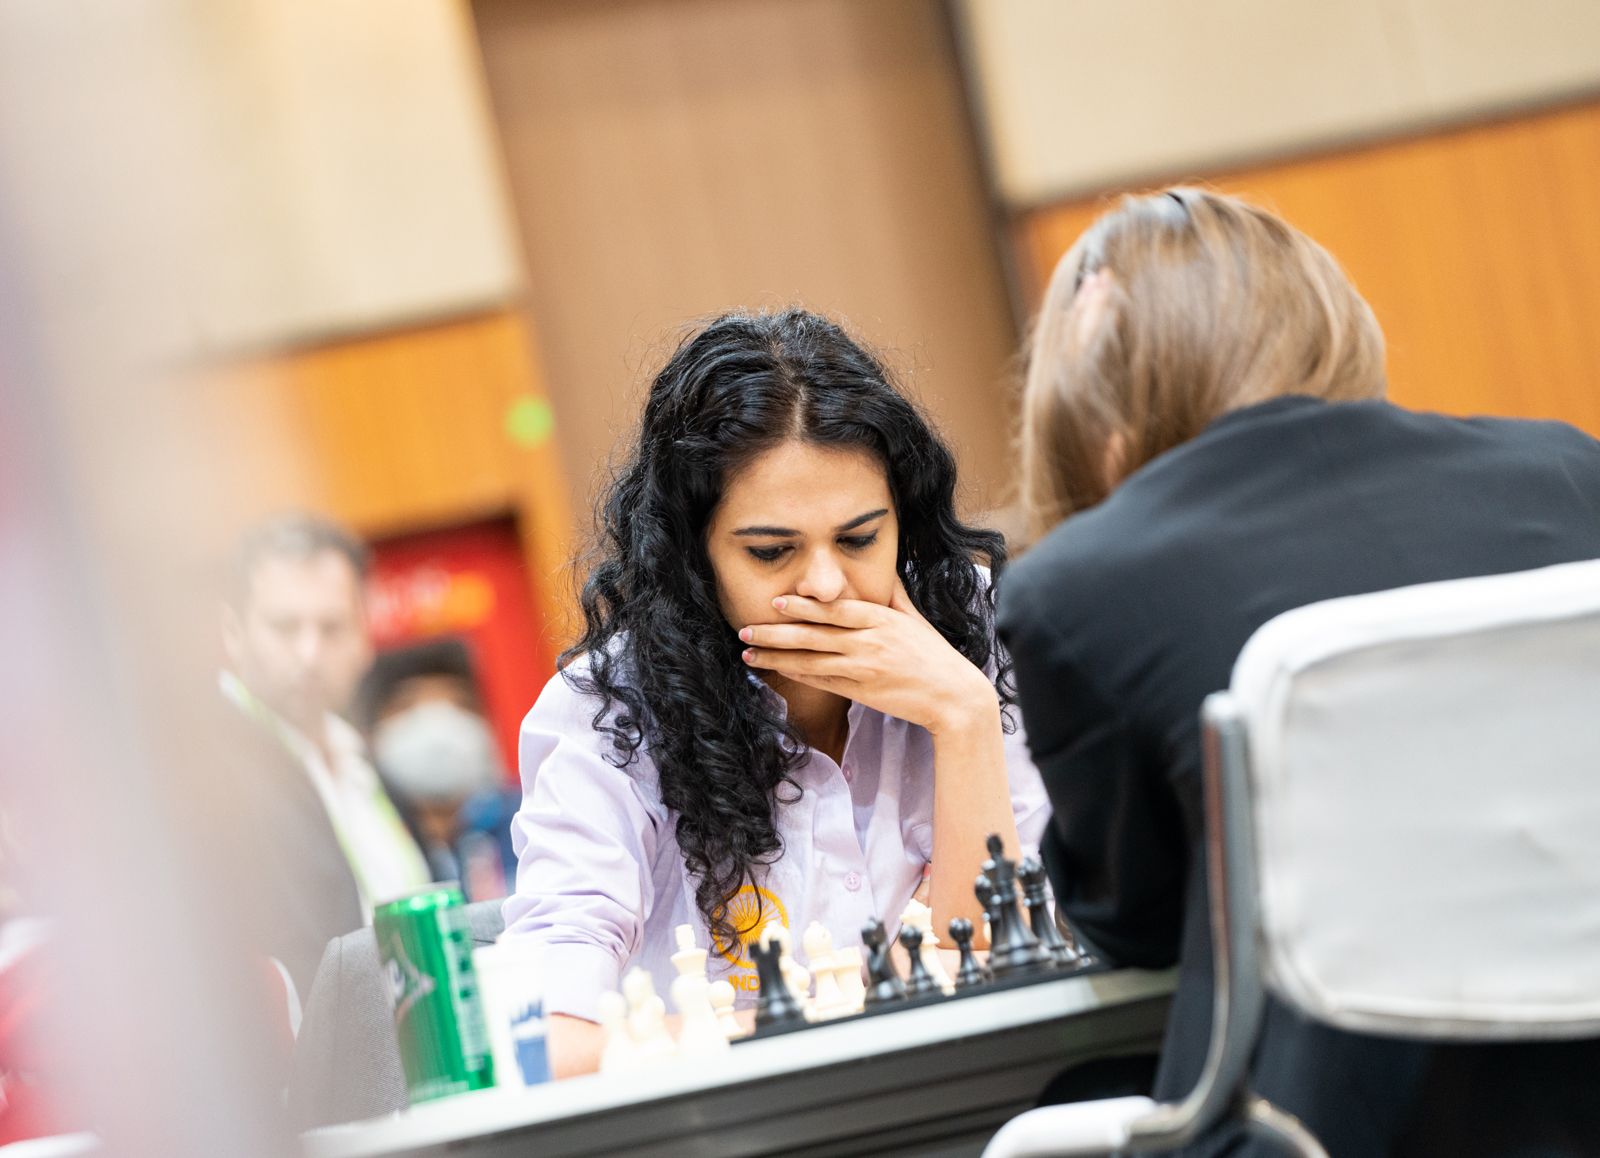 India A emerge sole leader in women's section at 44th Chess Olympiad